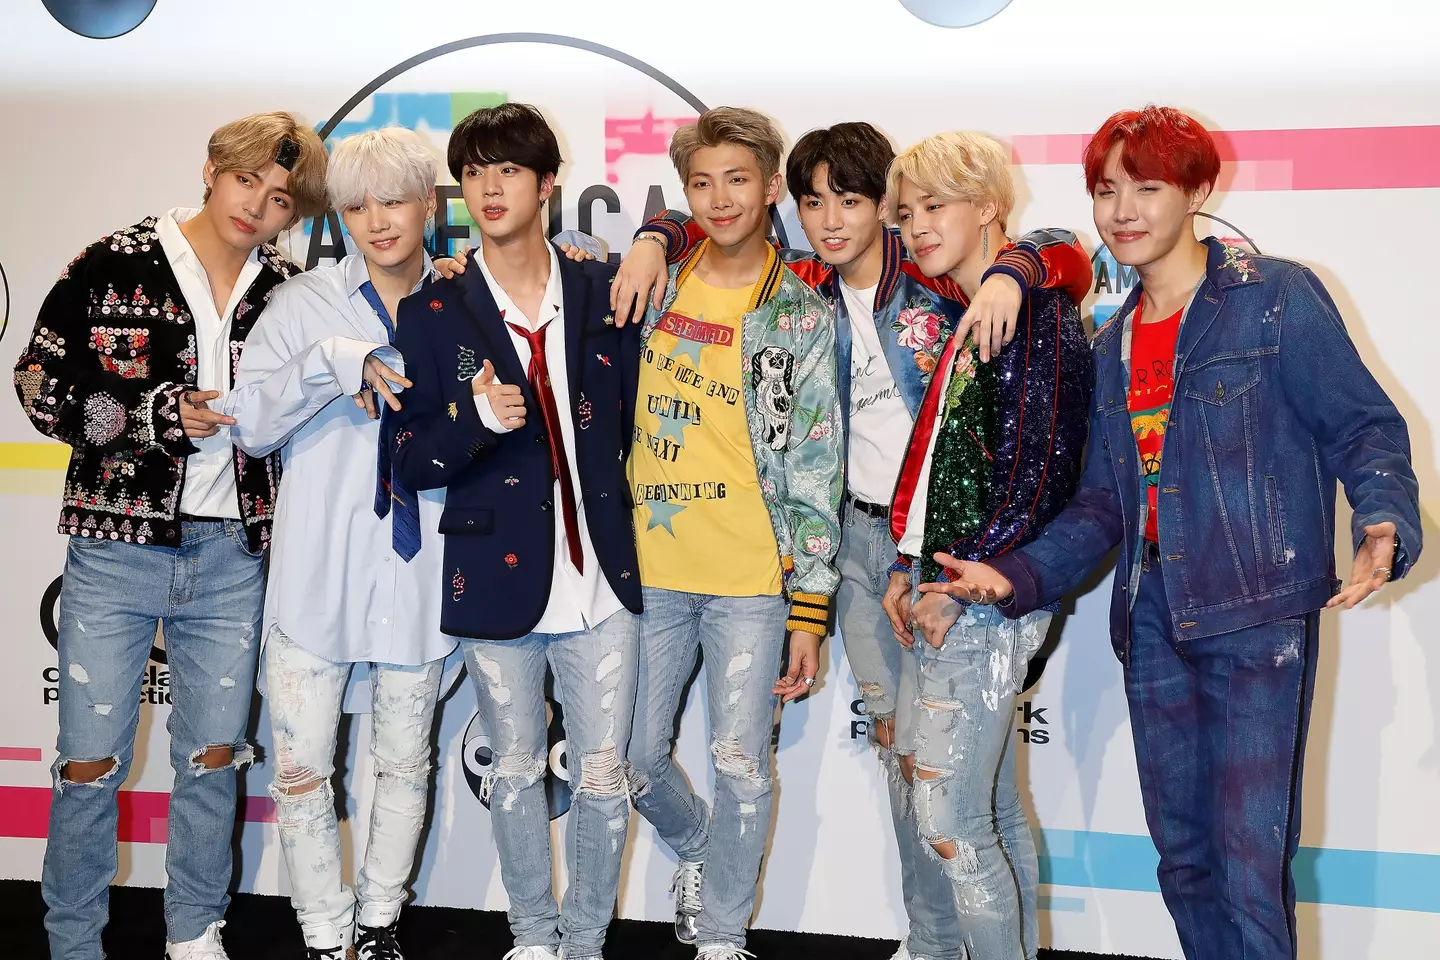 South Korea’s military has said conscripting K-pop band BTS into the army is ‘desirable’.